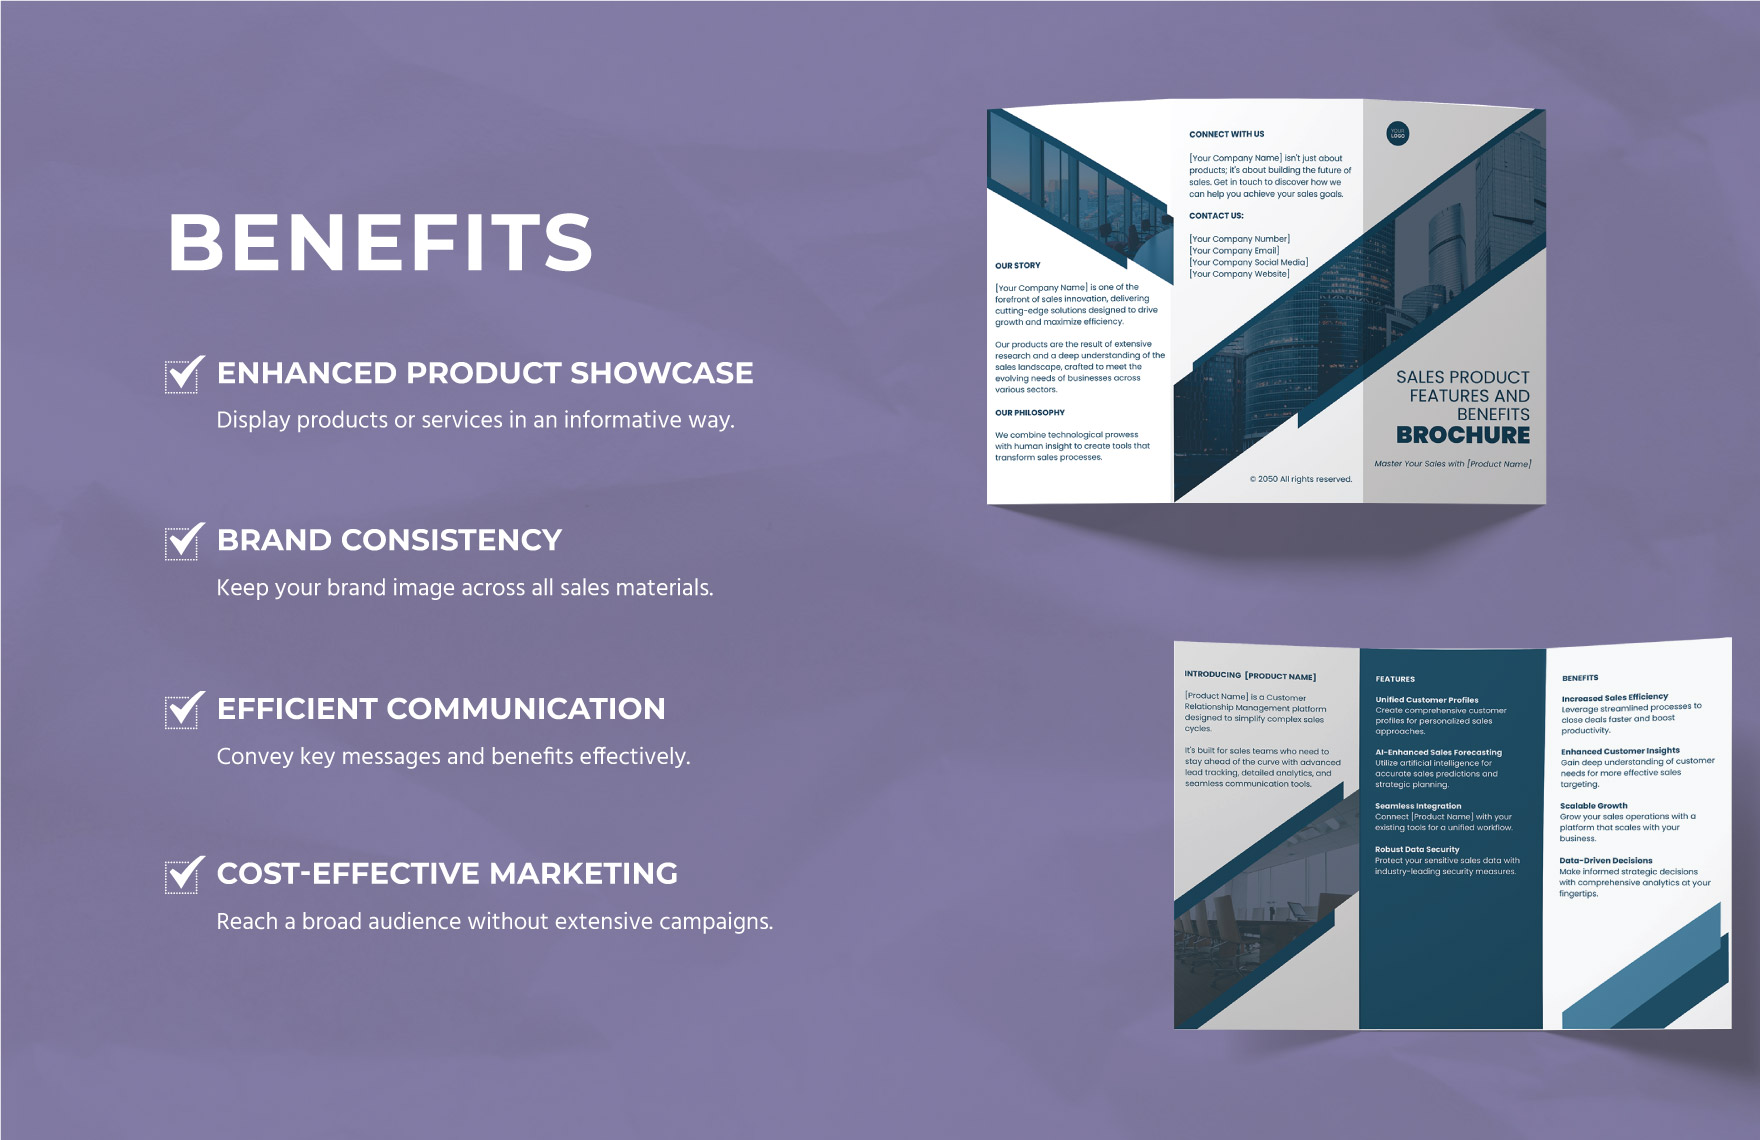 Sales Product Features and Benefits Brochure Template